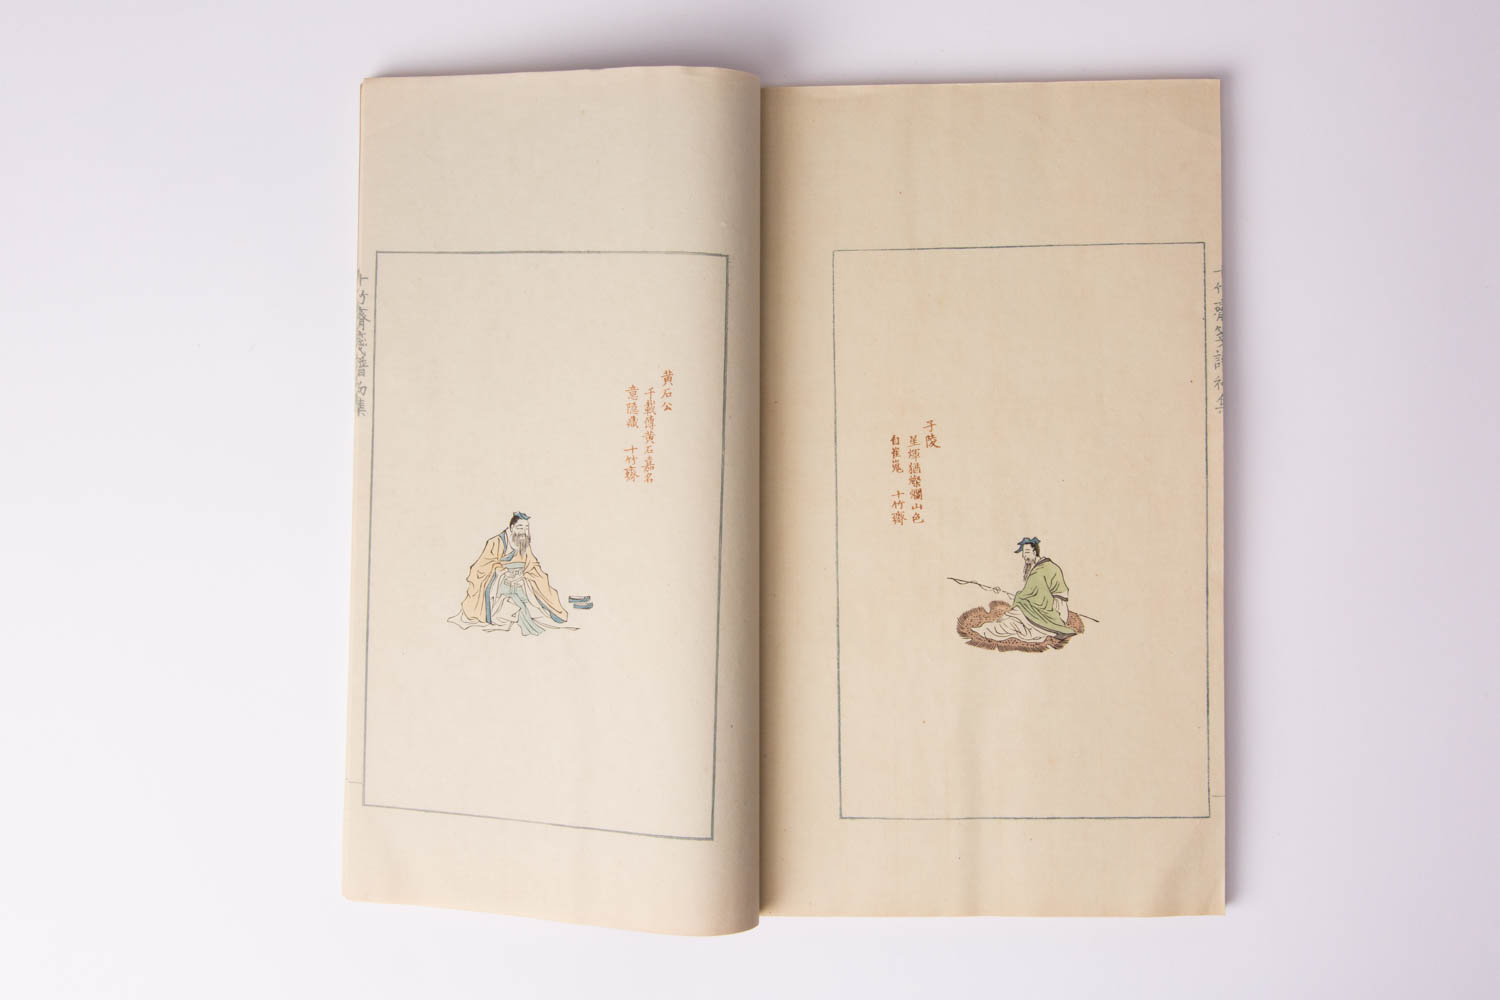 FOUR CATALOGUES FROM THE TEN BAMBOO STUDIO JULY 1952 Four volumes of Chinese woodblock prints of - Image 2 of 4